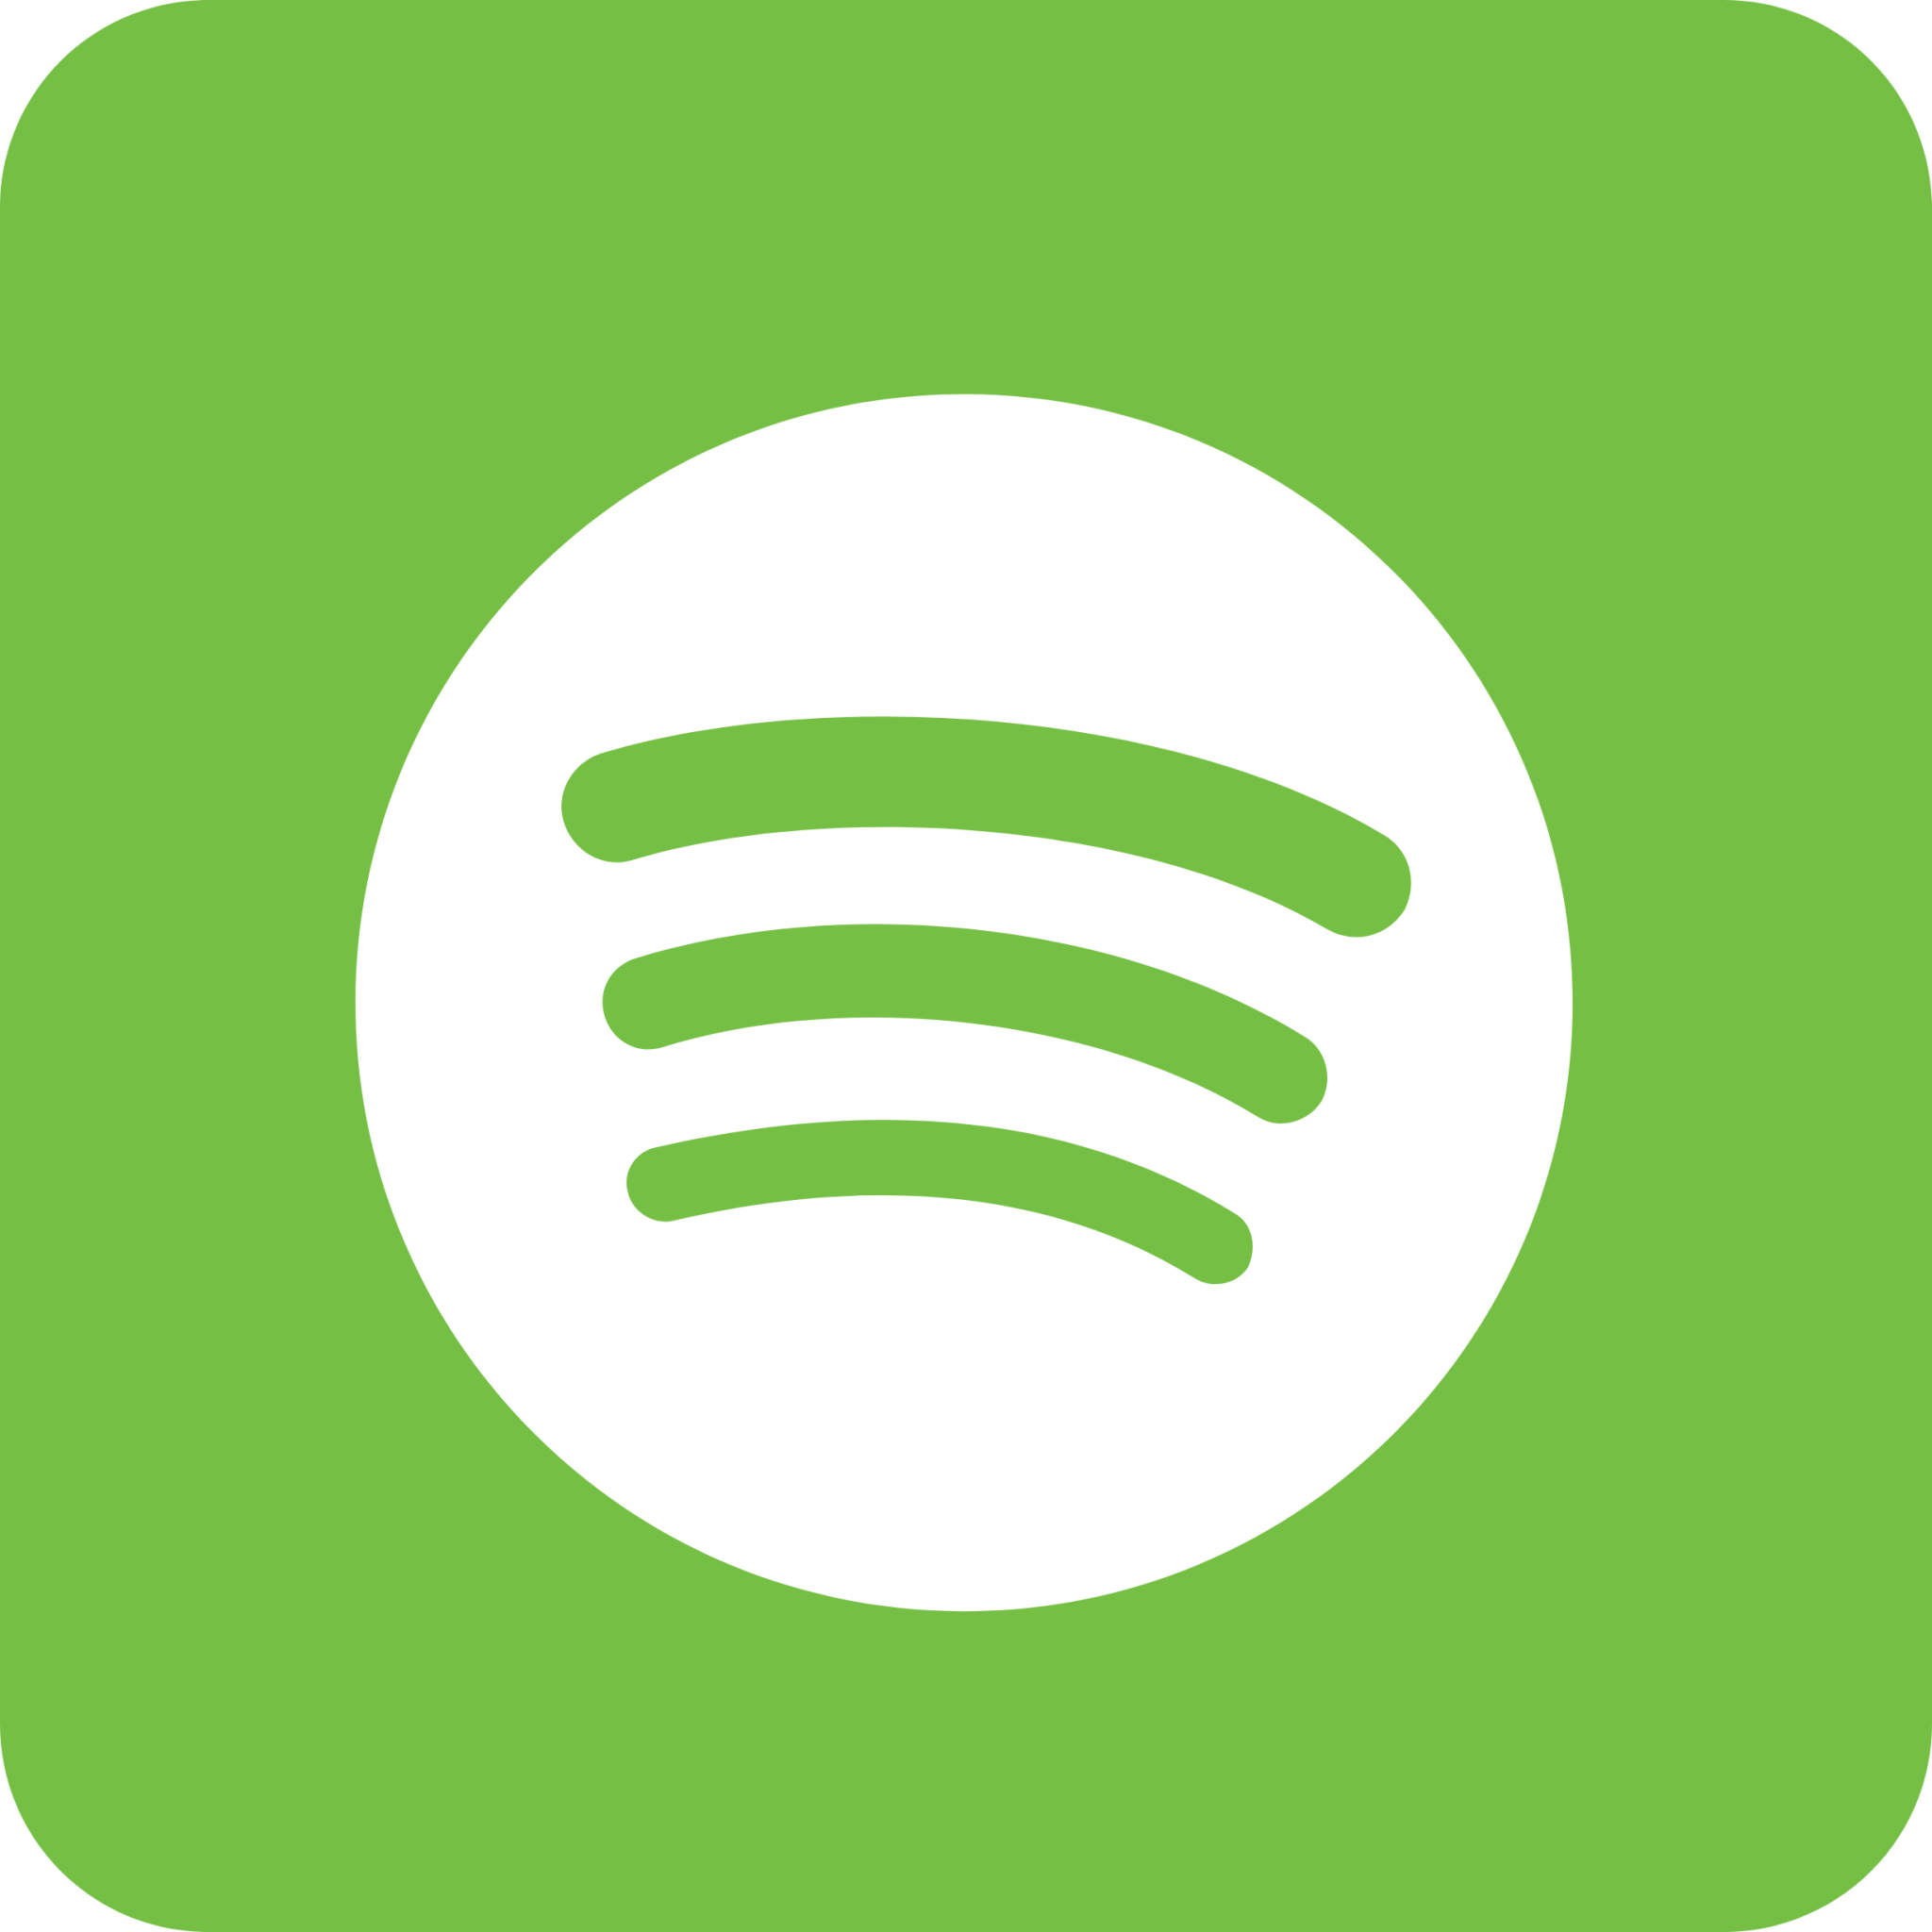 spotify rounded icon